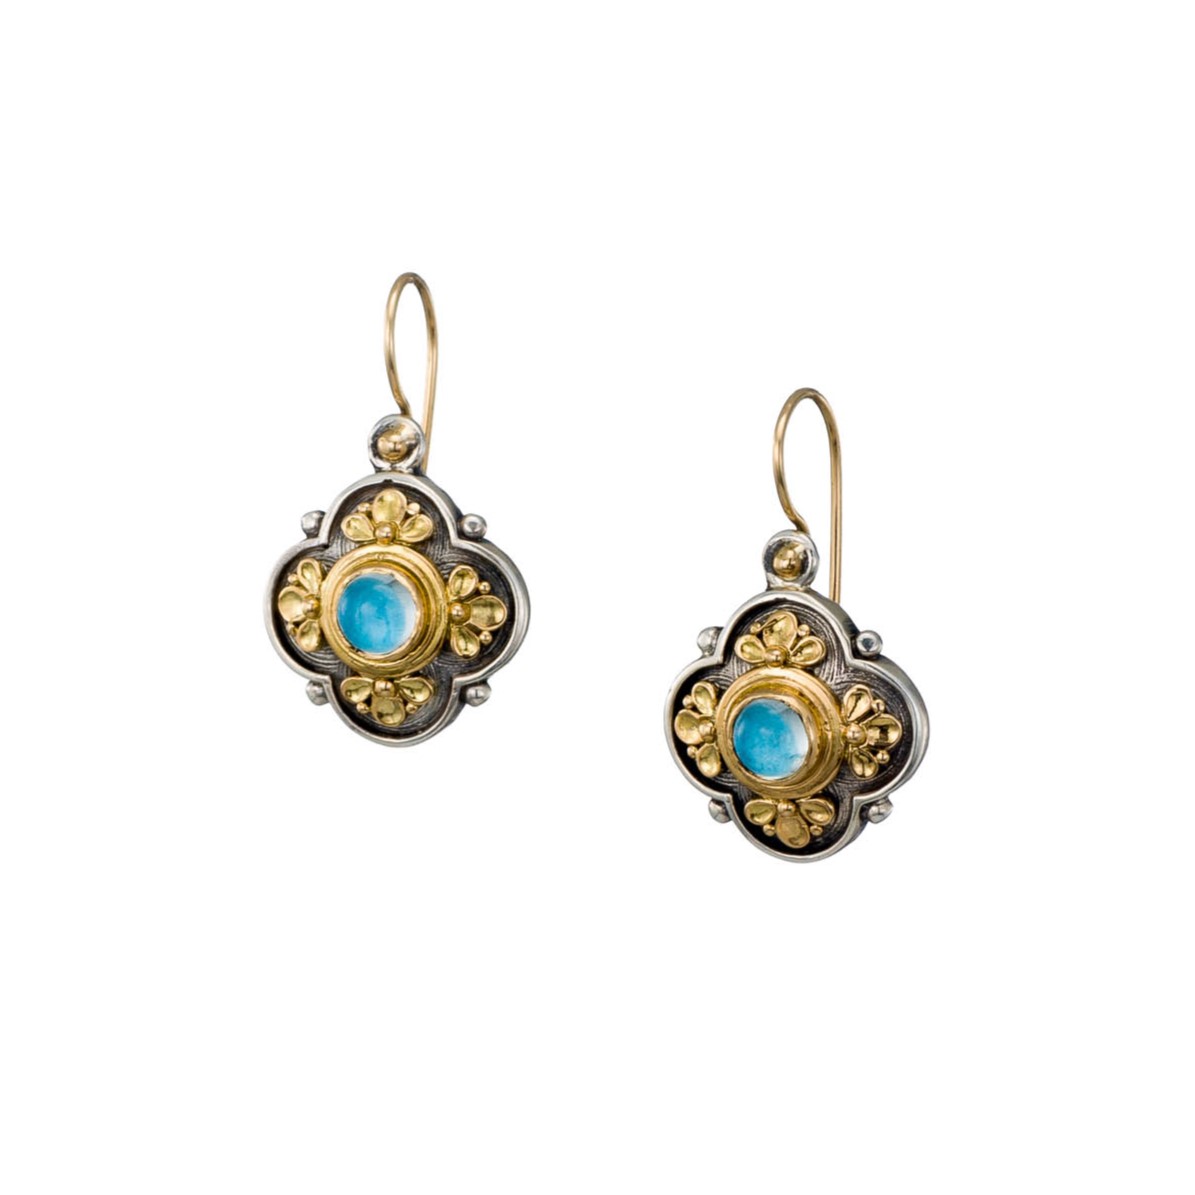 Athenian Flower Earrings in 18K Gold and Sterling Silver with Aquamarine